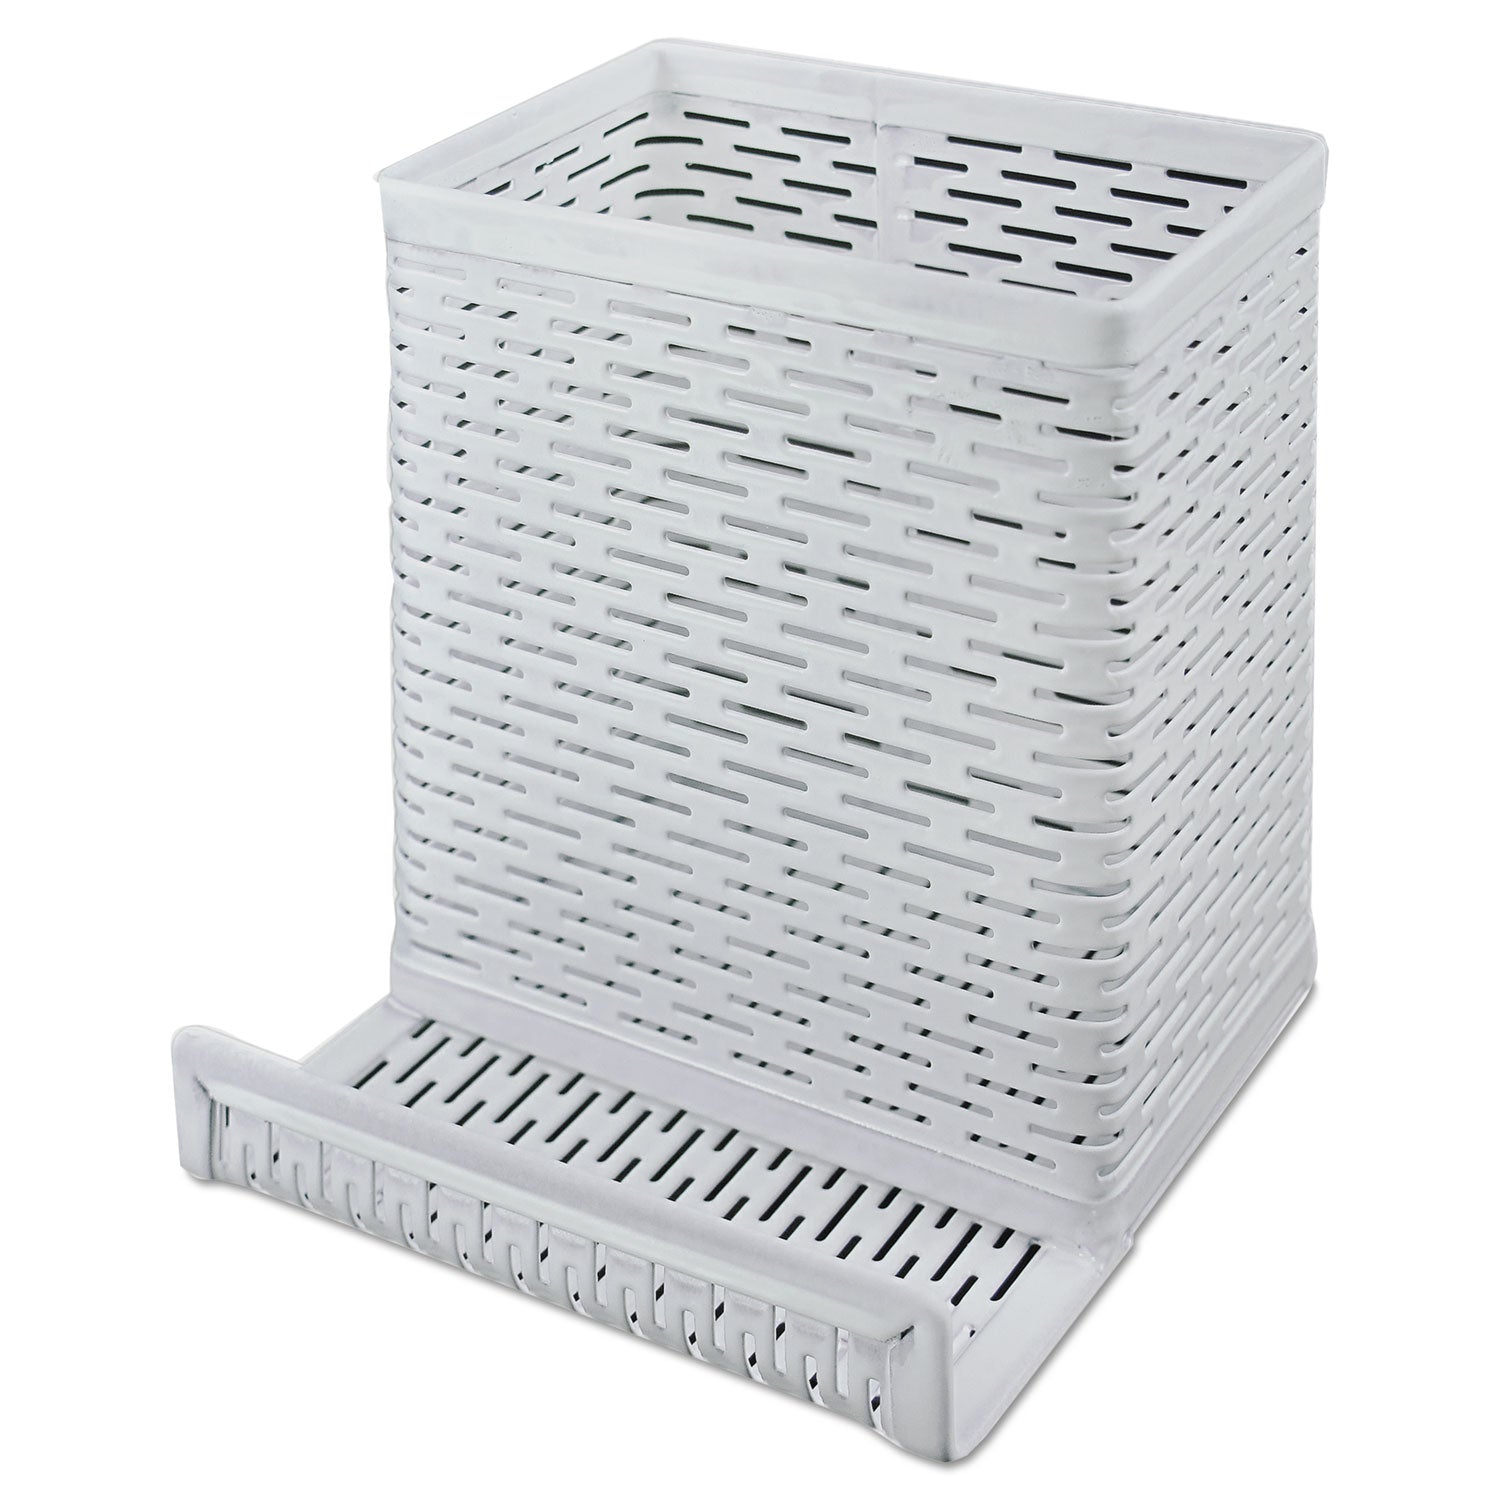 urban-collection-punched-metal-pencil-cup-cell-phone-stand-perforated-steel-35-x-35-white_aopart20014wh - 1